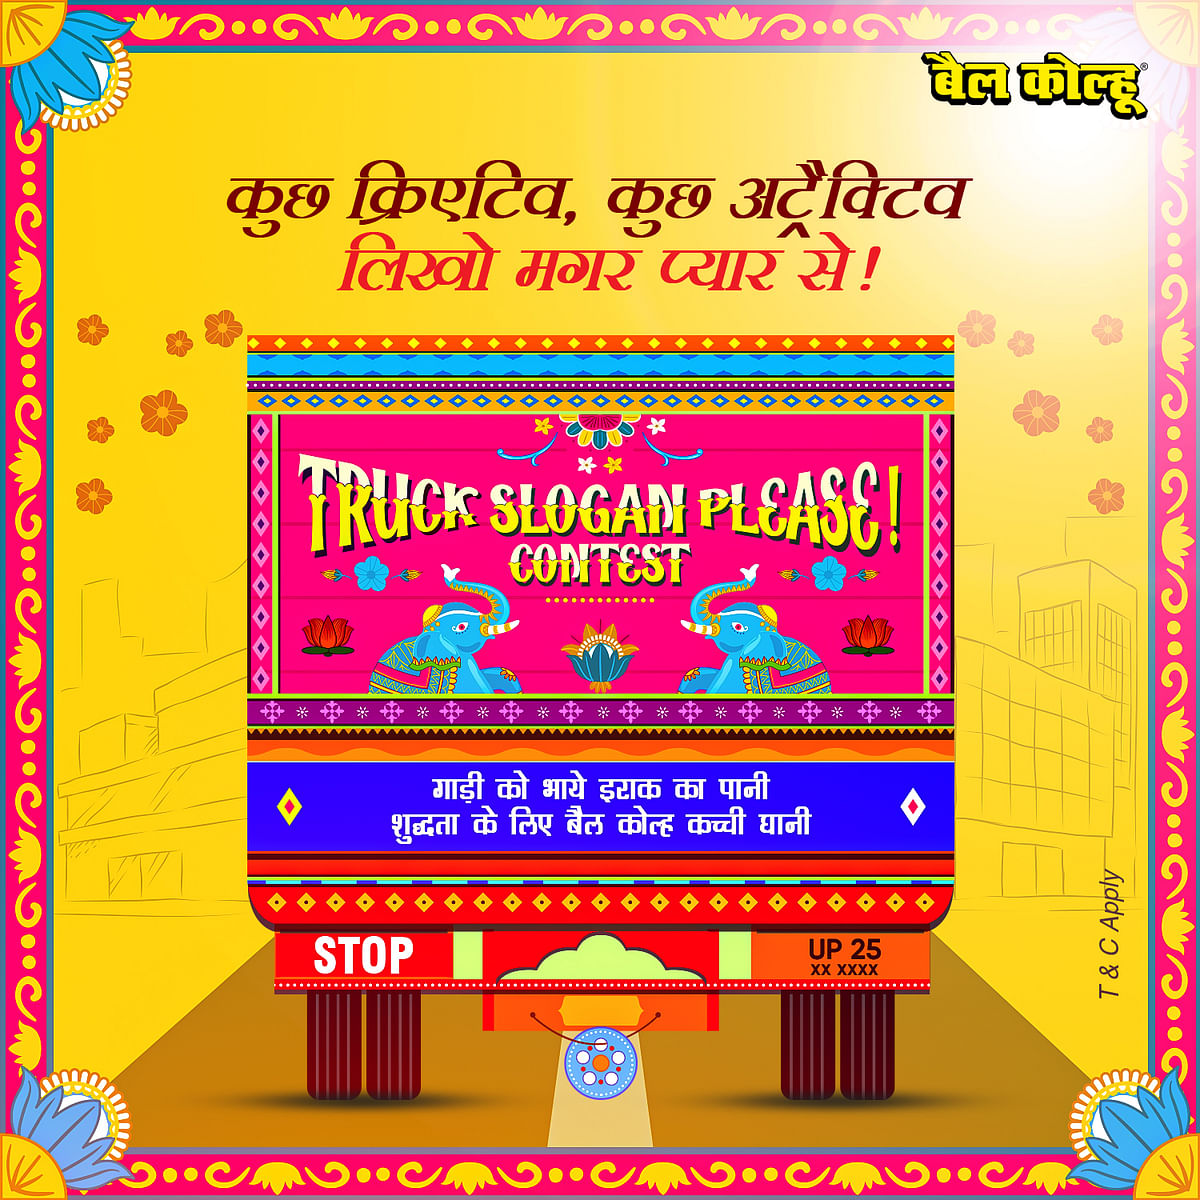 #TruckSloganPlease – The latest campaign By Bail Kolhu to engage people’s creative minds